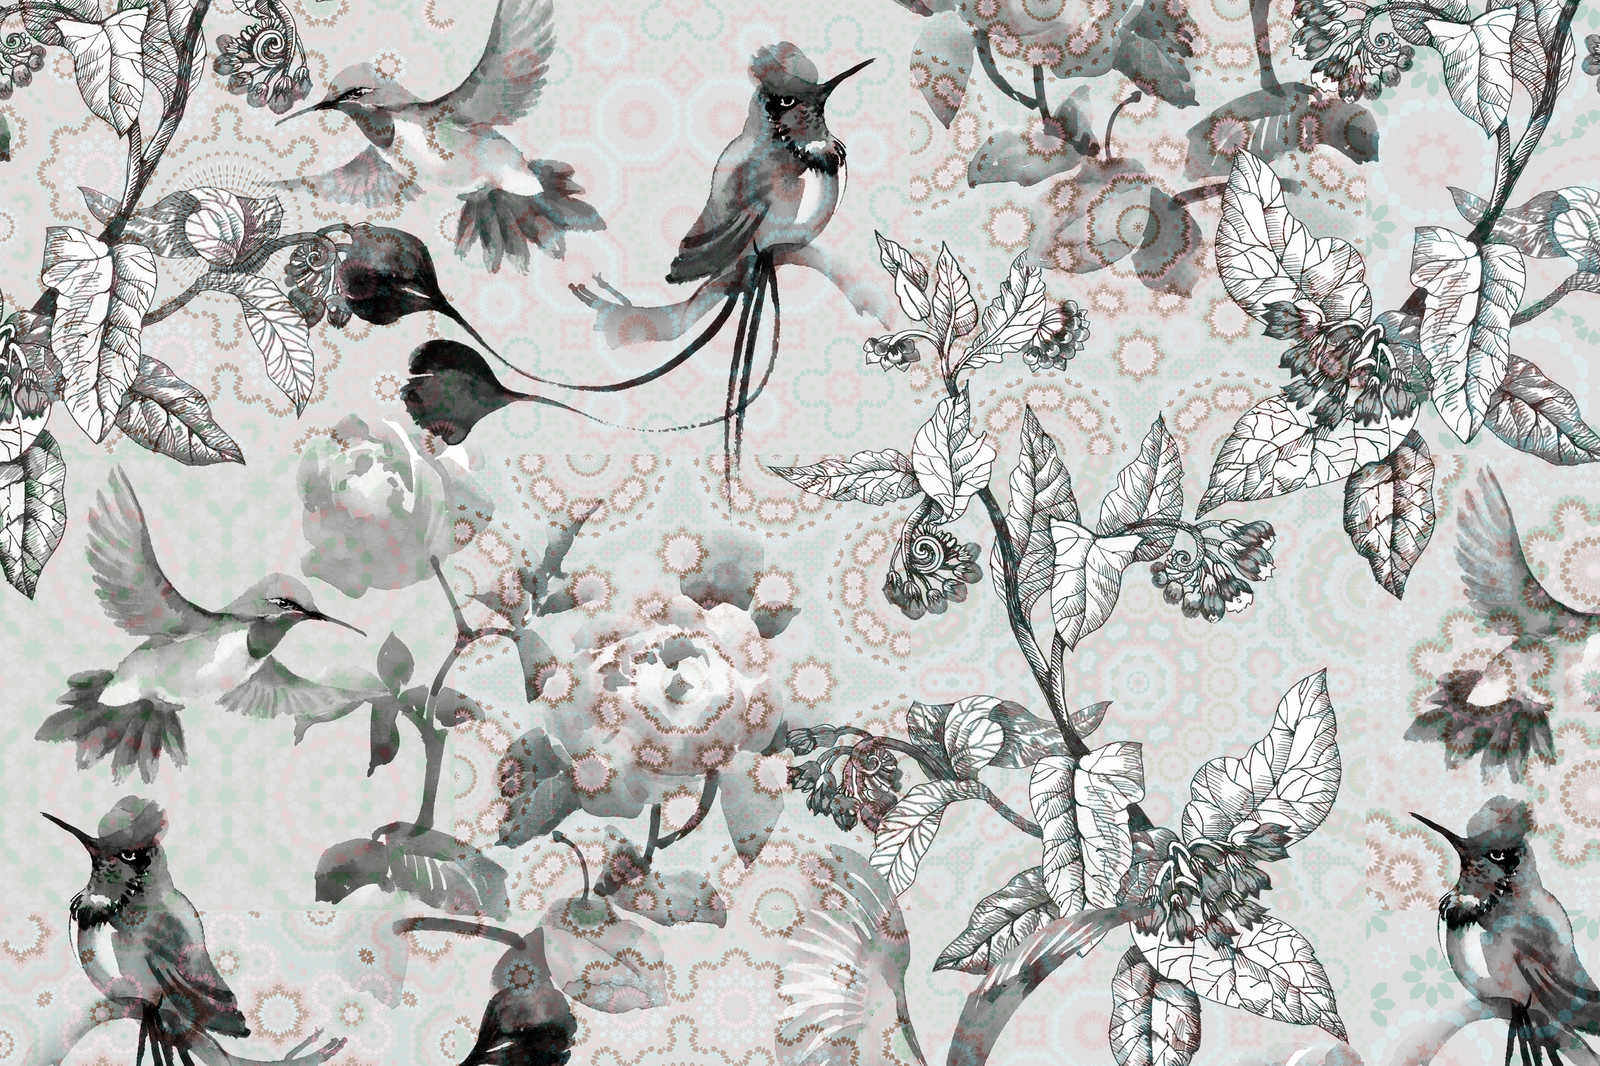             Toile Naturel Style style collage | exotic mosaic 4 - 0,90 m x 0,60 m
        